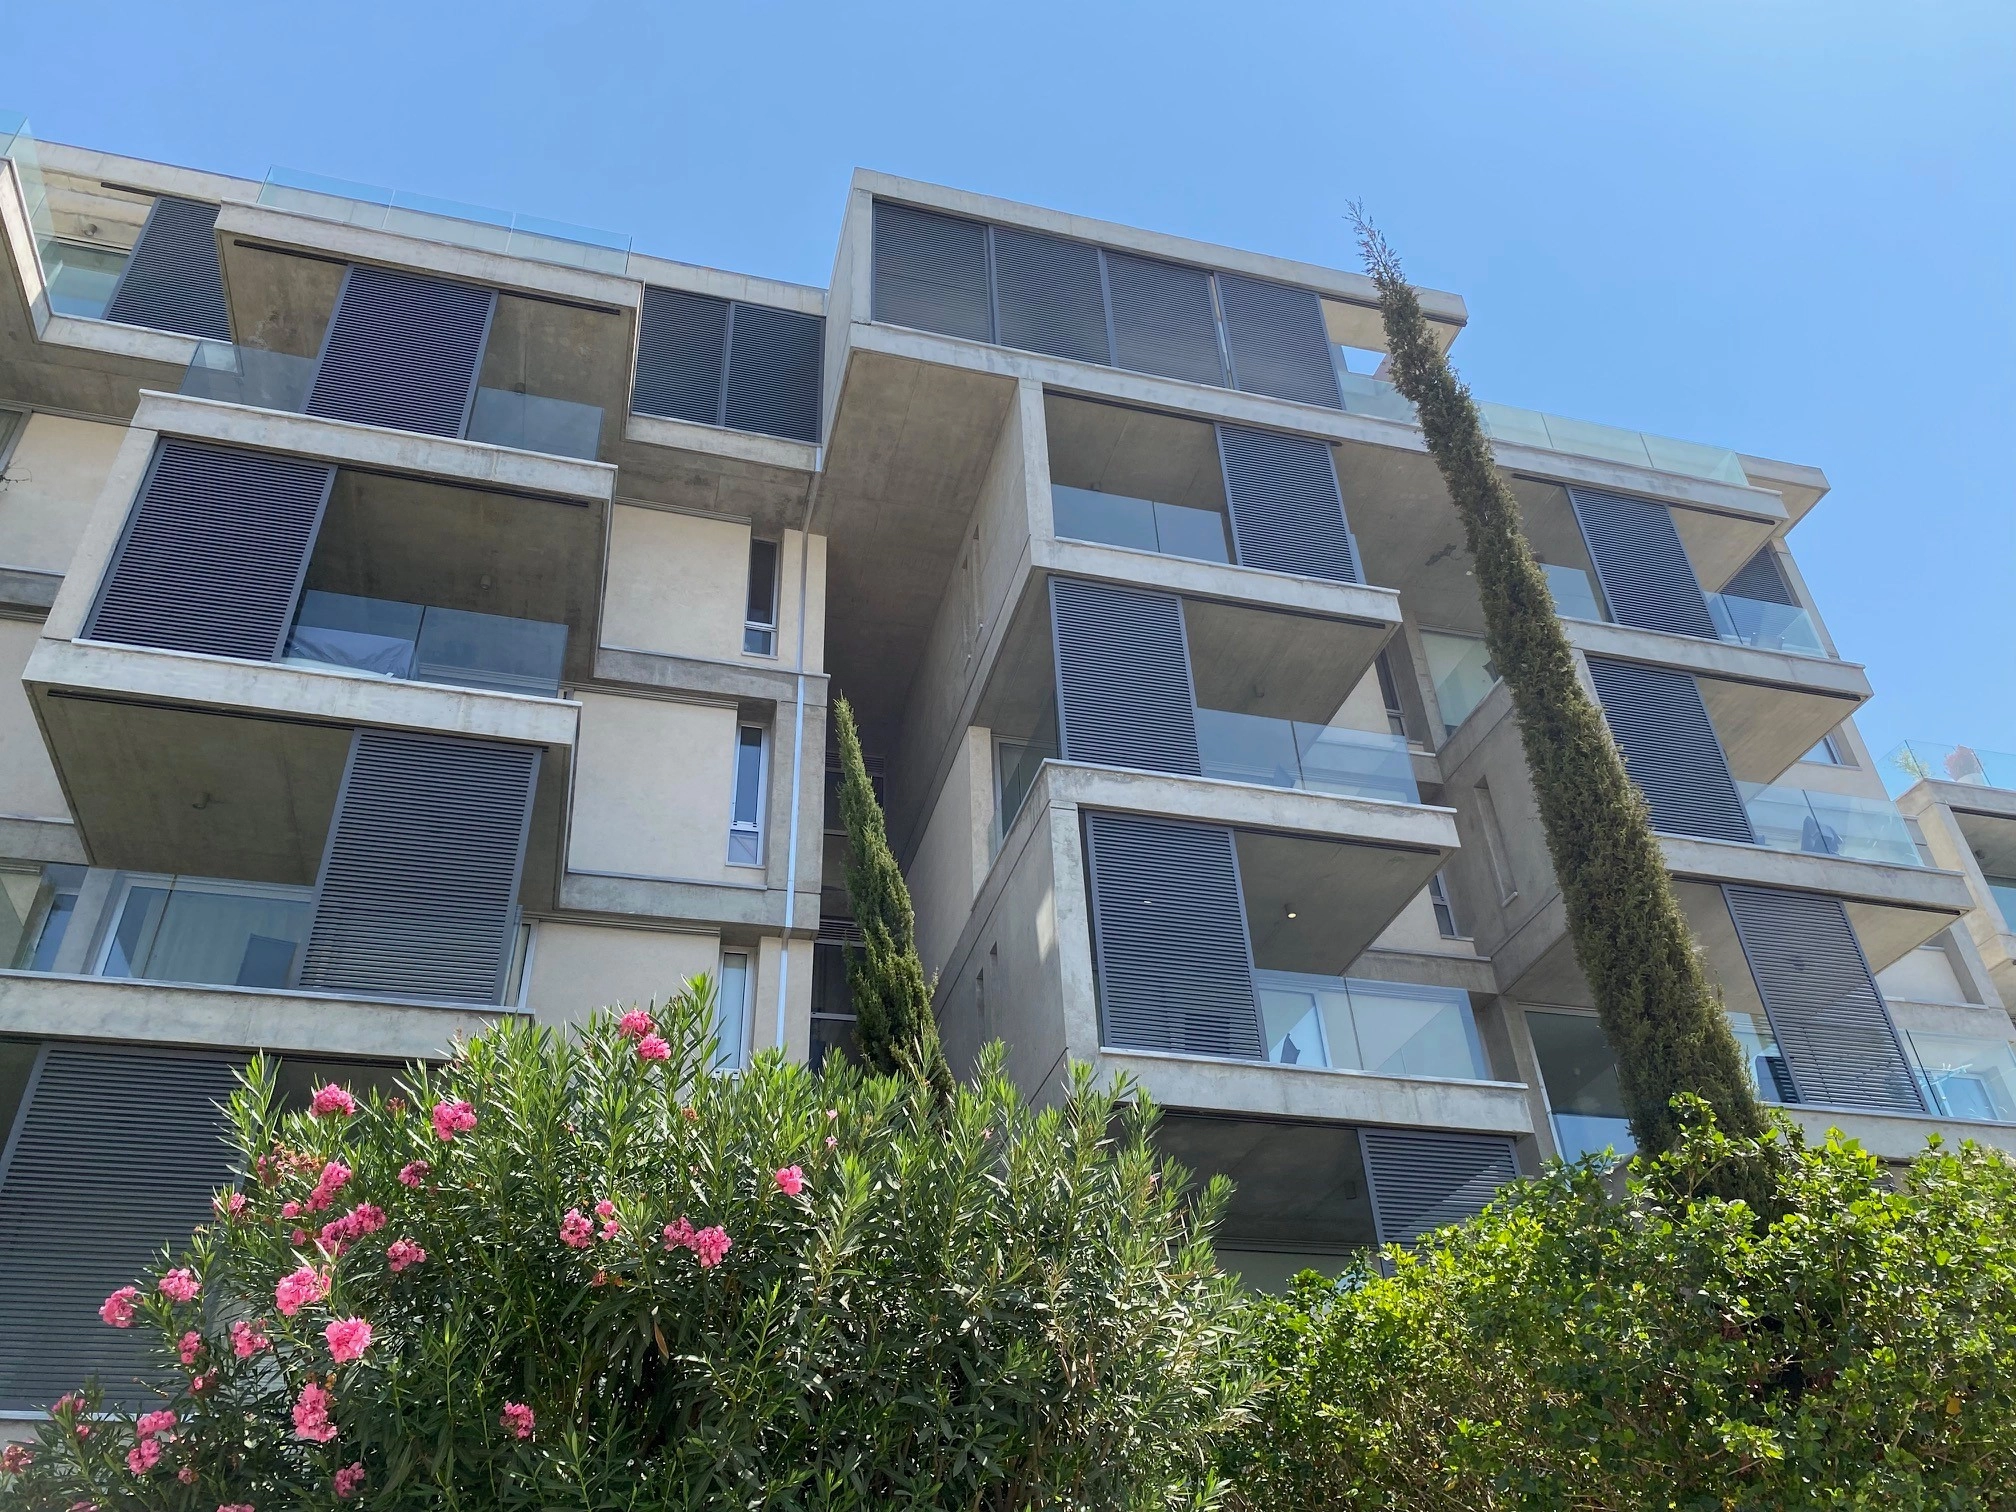 2 Bedroom Apartment for Sale in Limassol – Neapolis